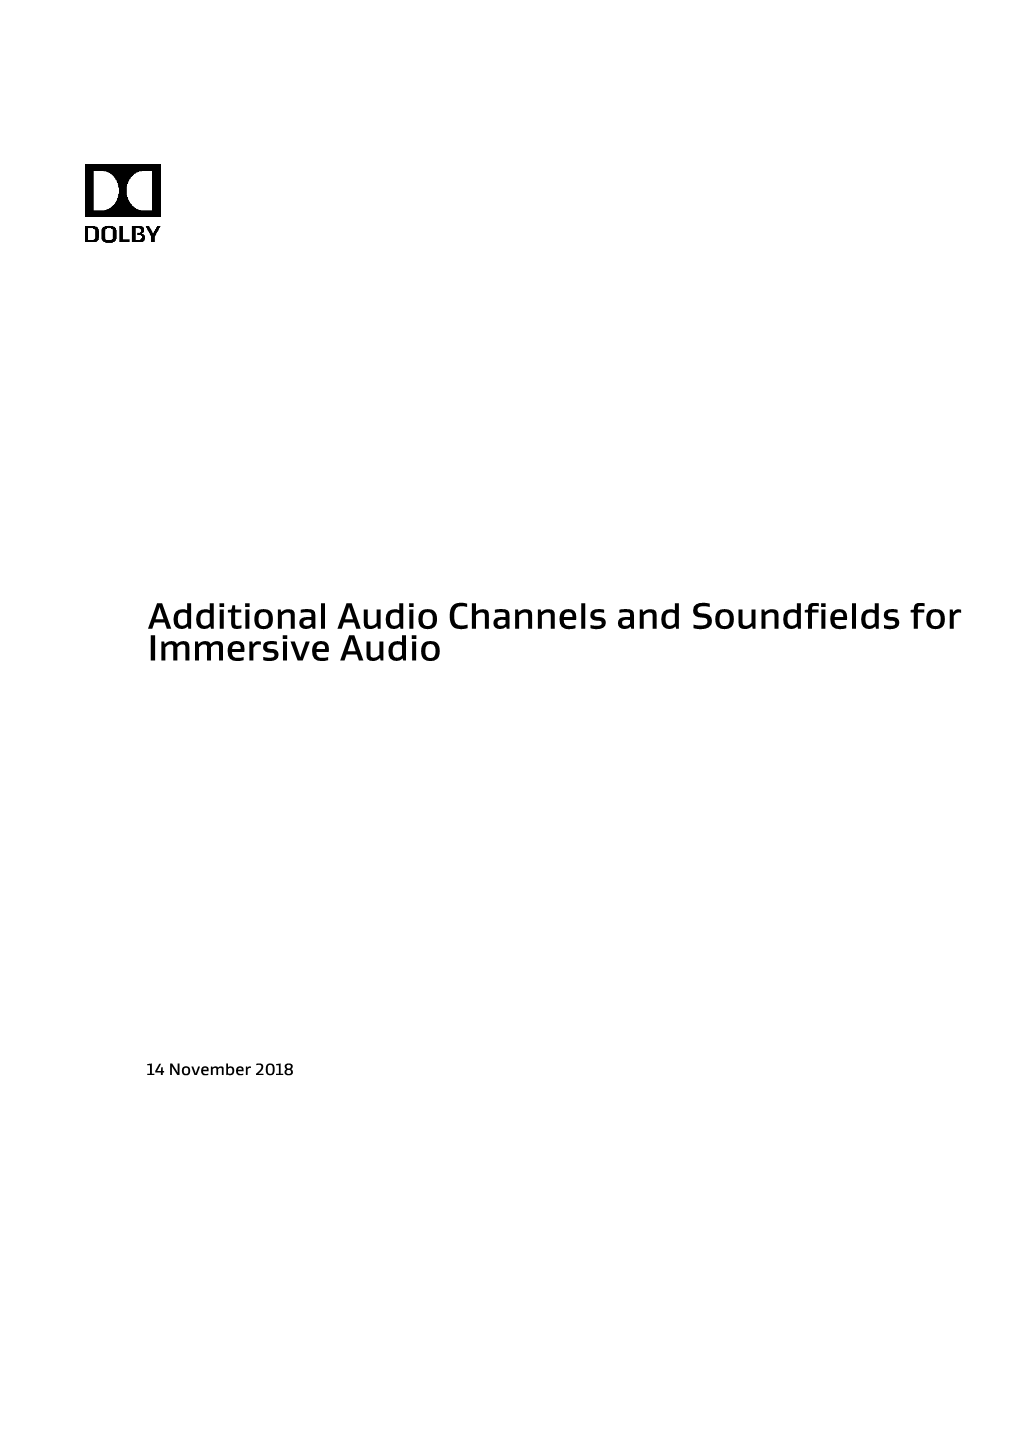 Additional Audio Channels and Soundfields for Immersive Audio